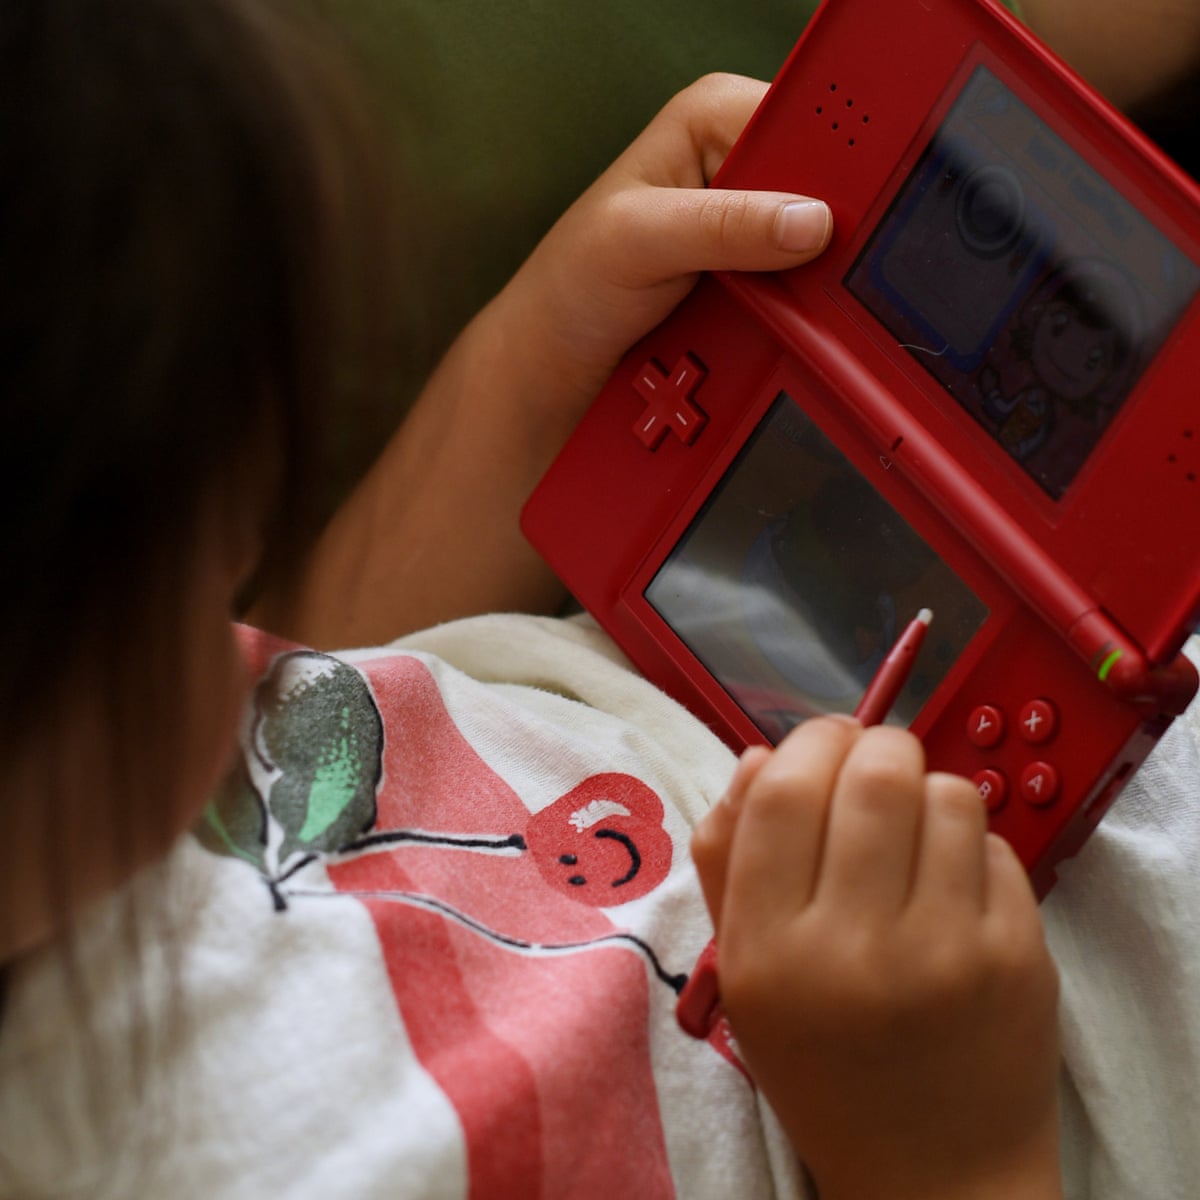 The Nintendo DS more than just a – it's part of my family history | | The Guardian